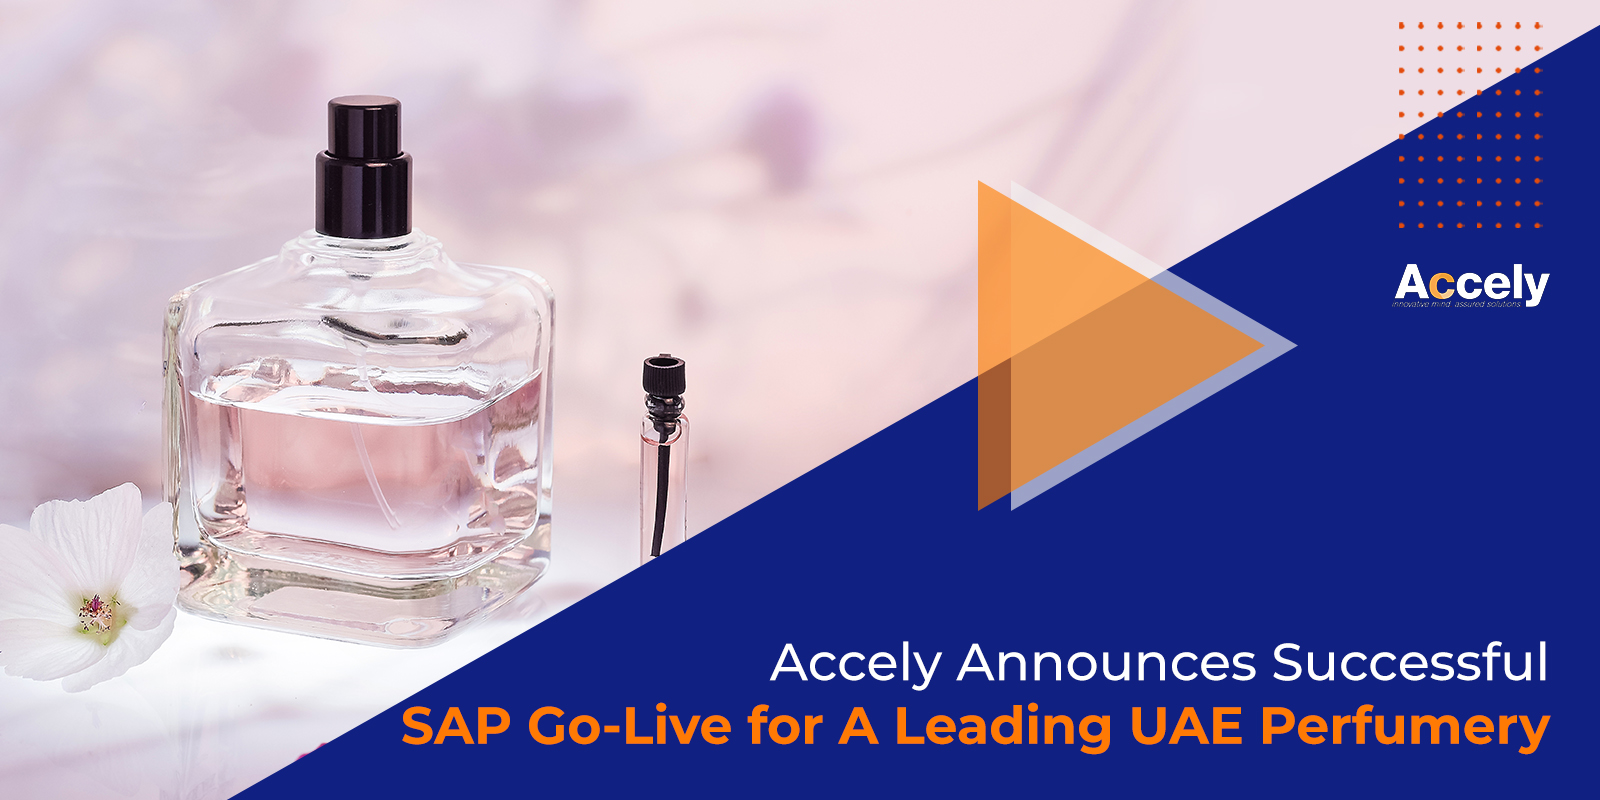 Accely Announces Successful SAP Go-Live for A Leading UAE Perfumery